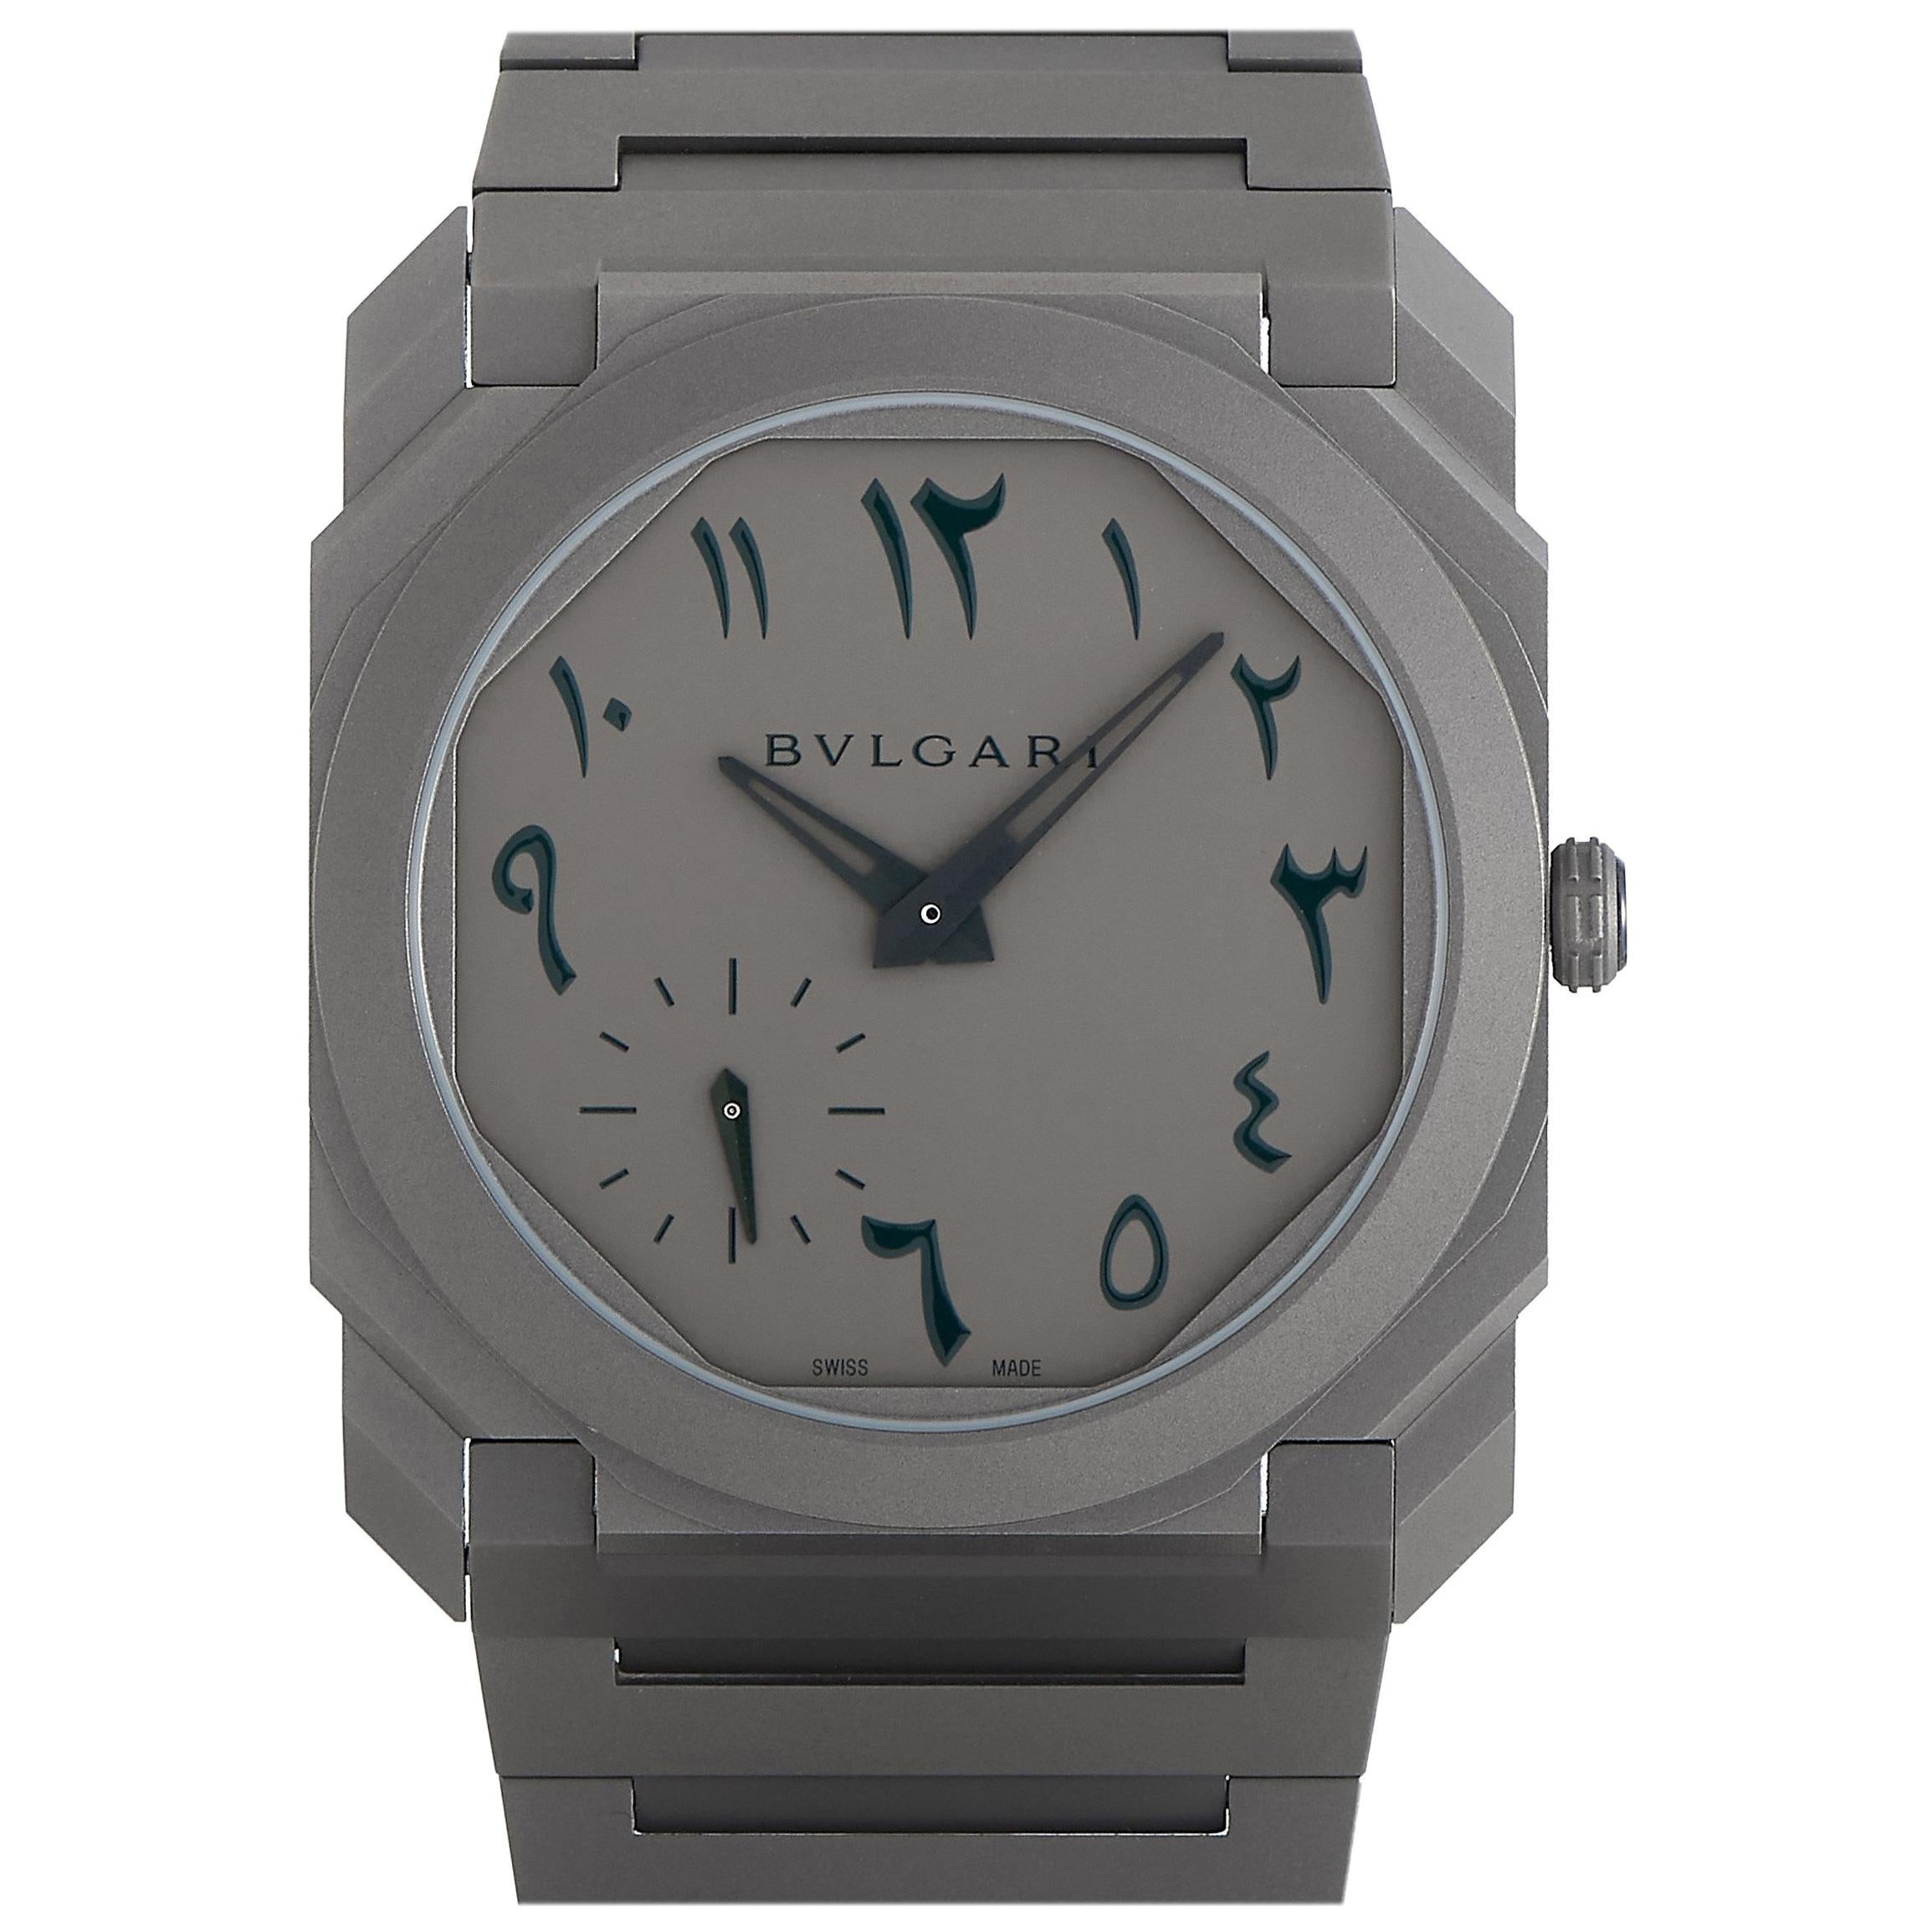 Bvlgari Exclusive Edition Octo Finissimo Watch 103023